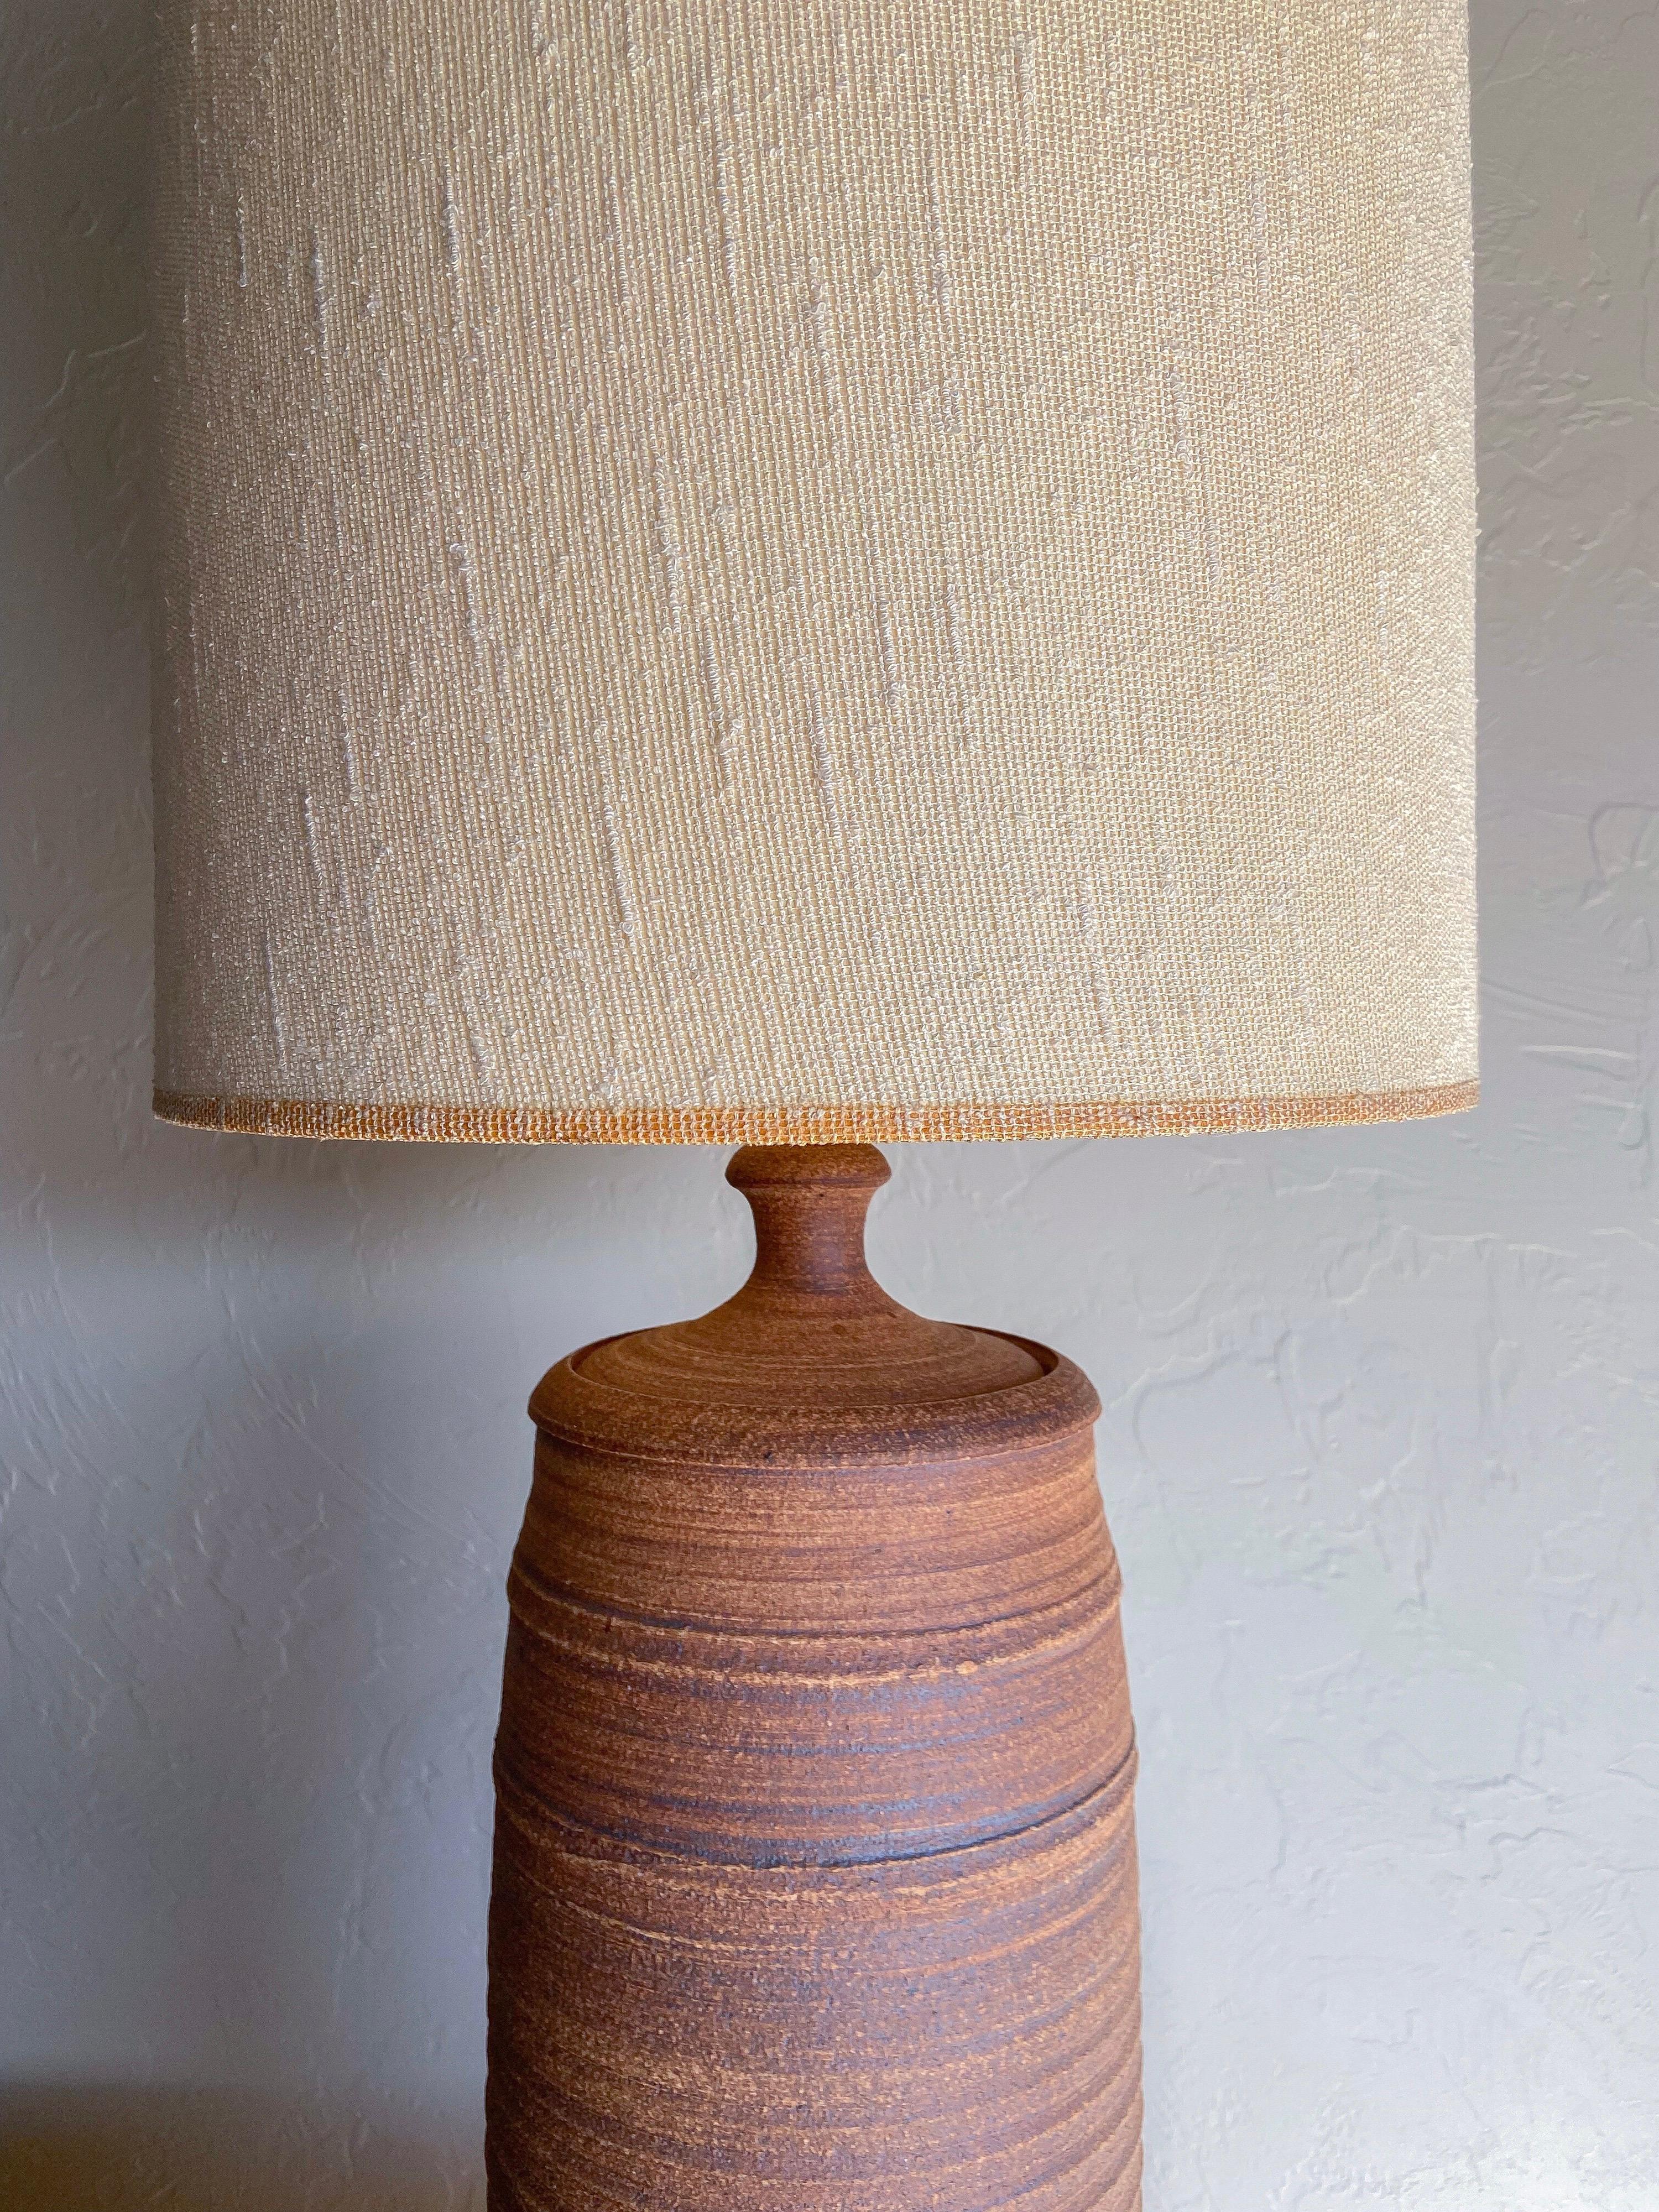 American Large Earthtone Stoneware Lamp by Affiliated Craftsman Studios, 1970’s For Sale